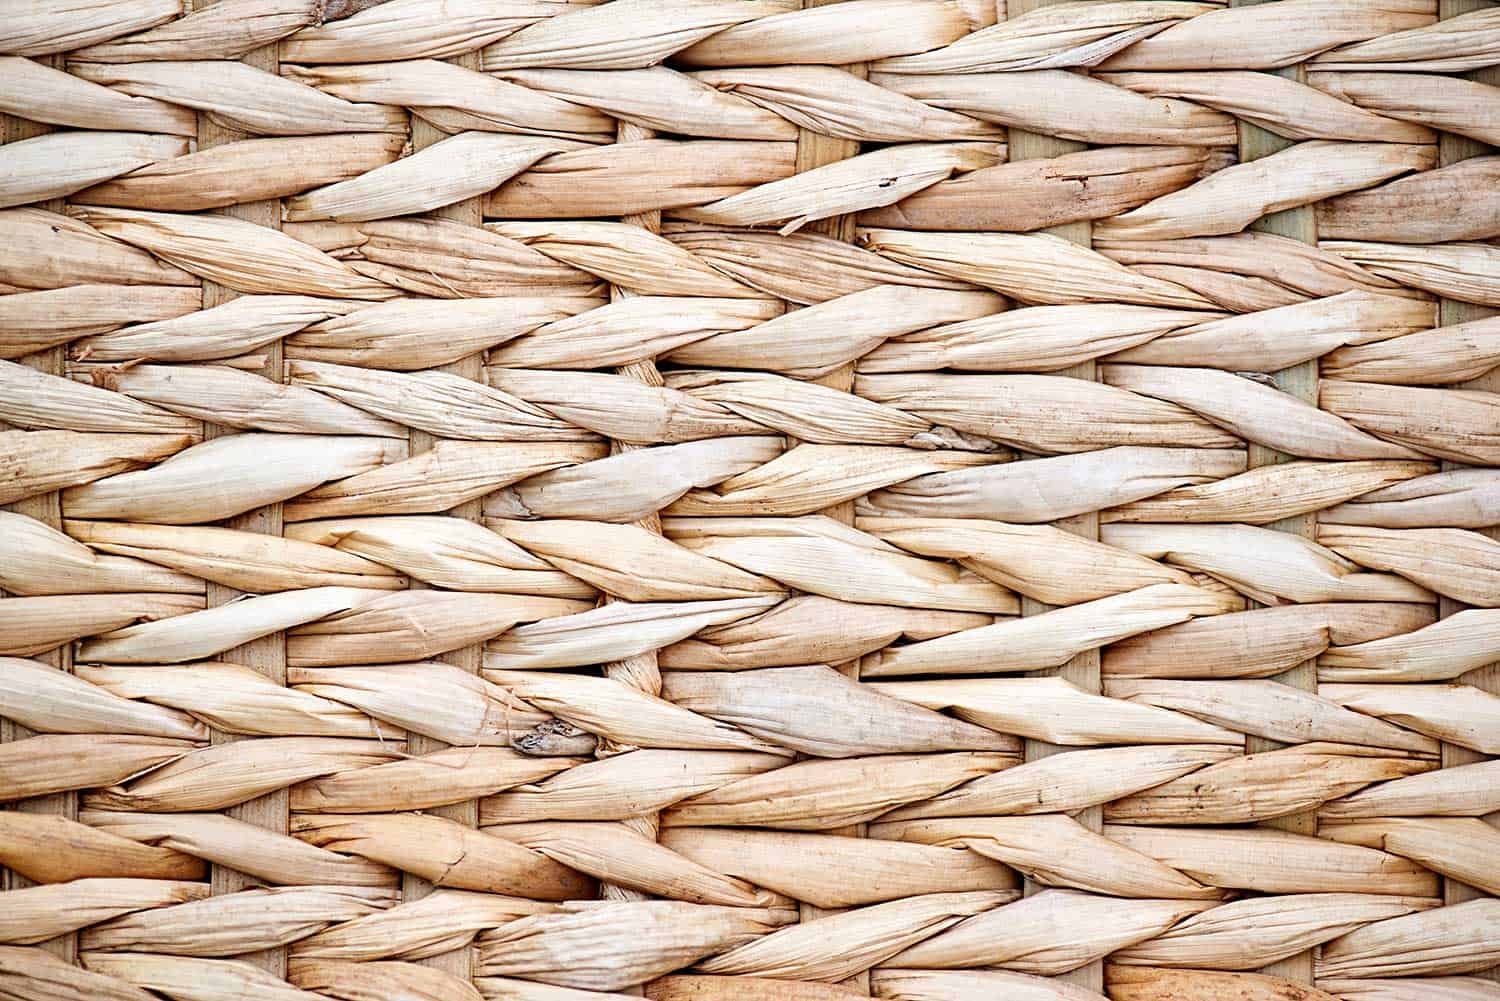 Basket weaving reed and cane pattern